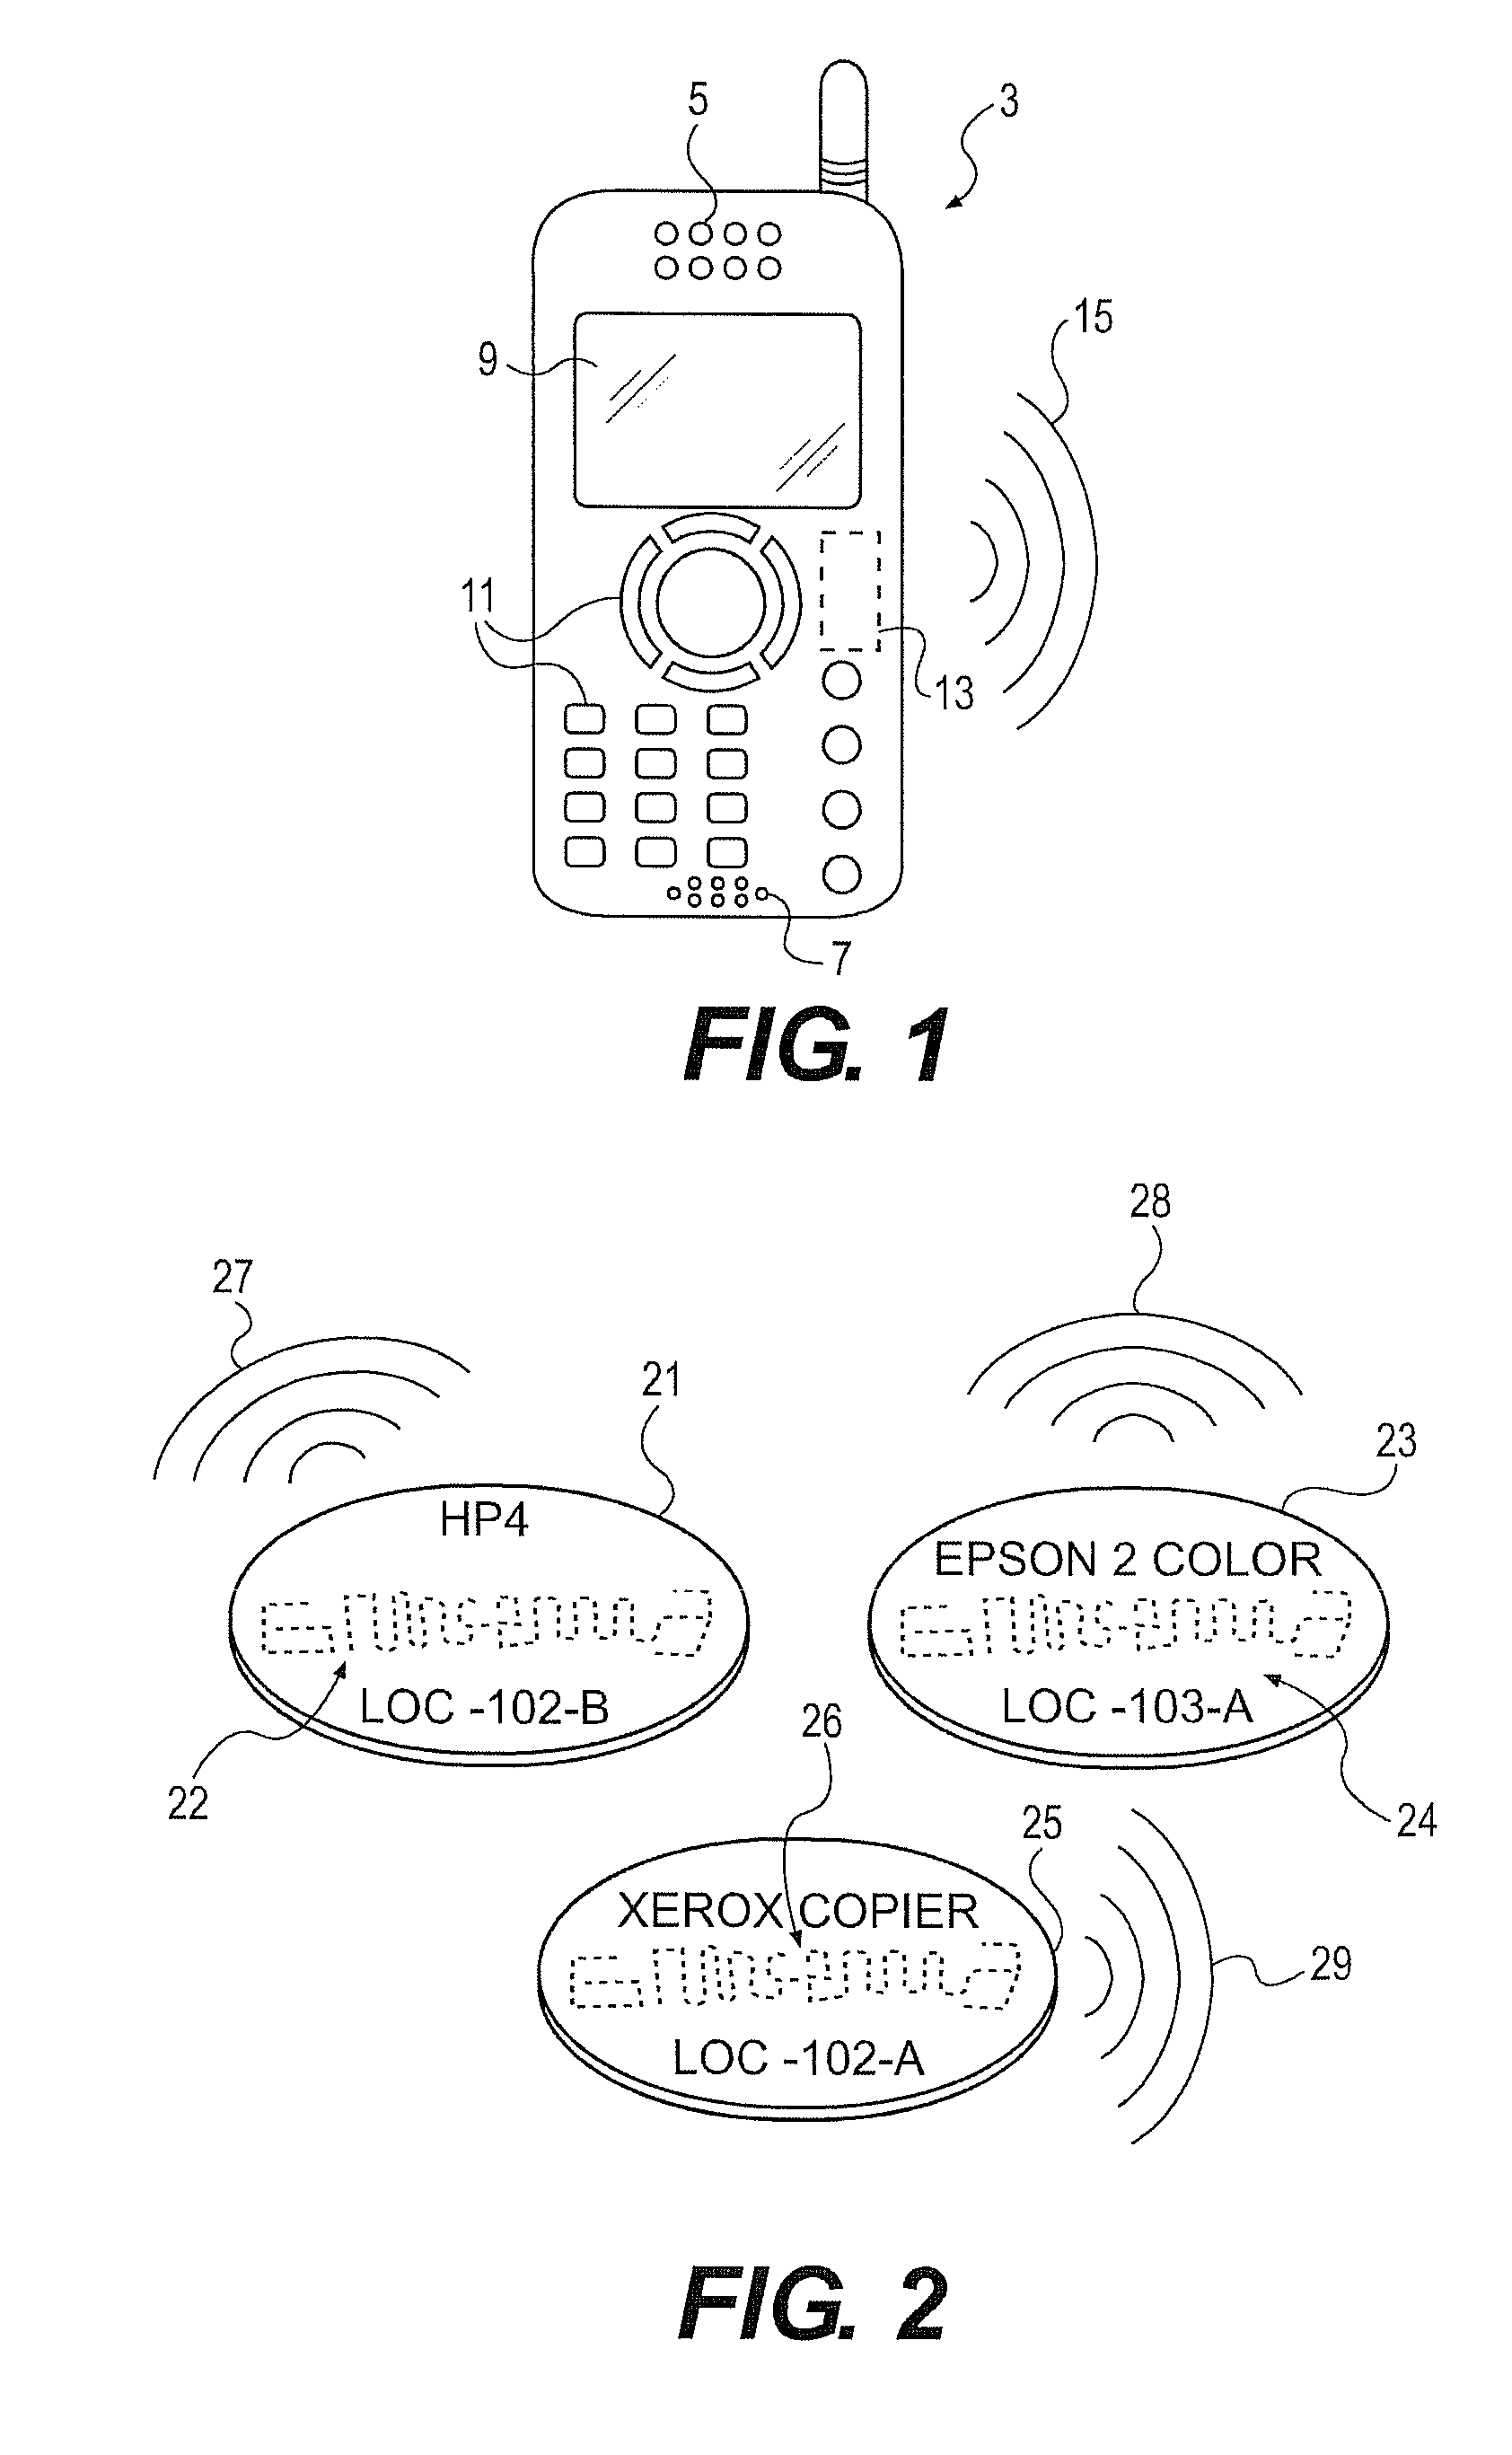 Mobile communication device with interrogator to interact with tags